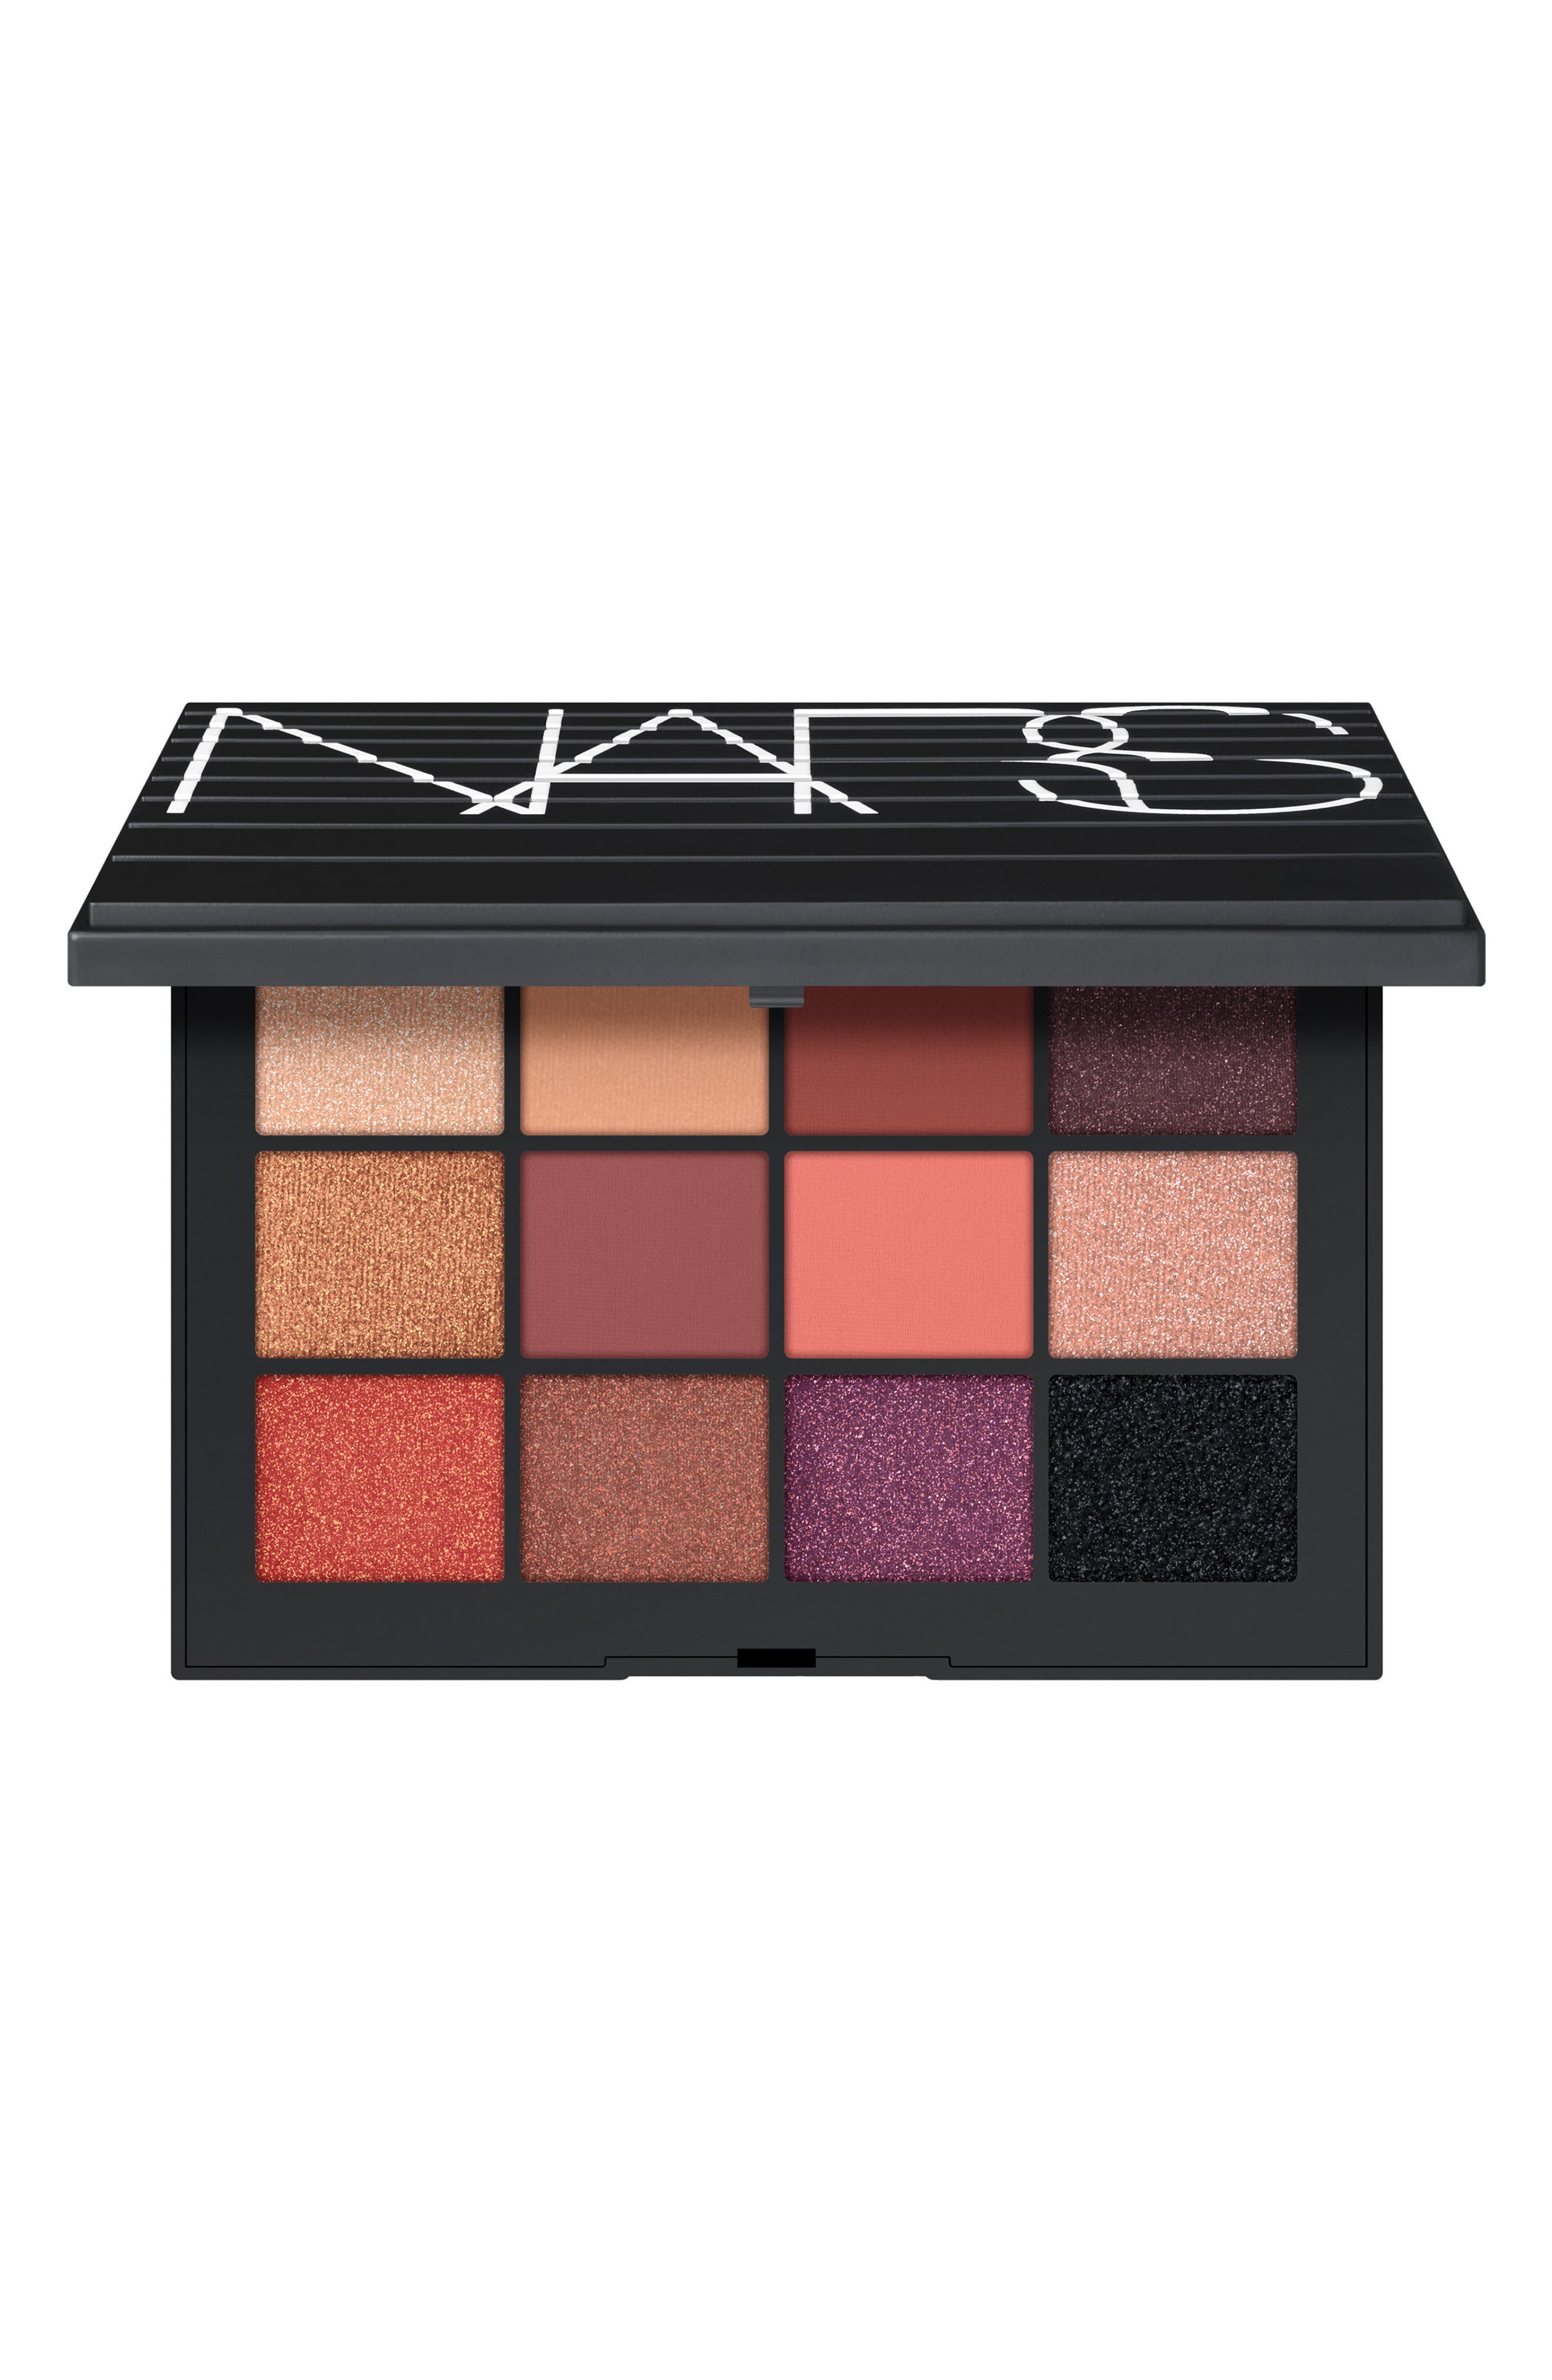 UPC 194251001104 product image for Nars Climax Extreme Effects Eyeshadow Palette - No Colour | upcitemdb.com